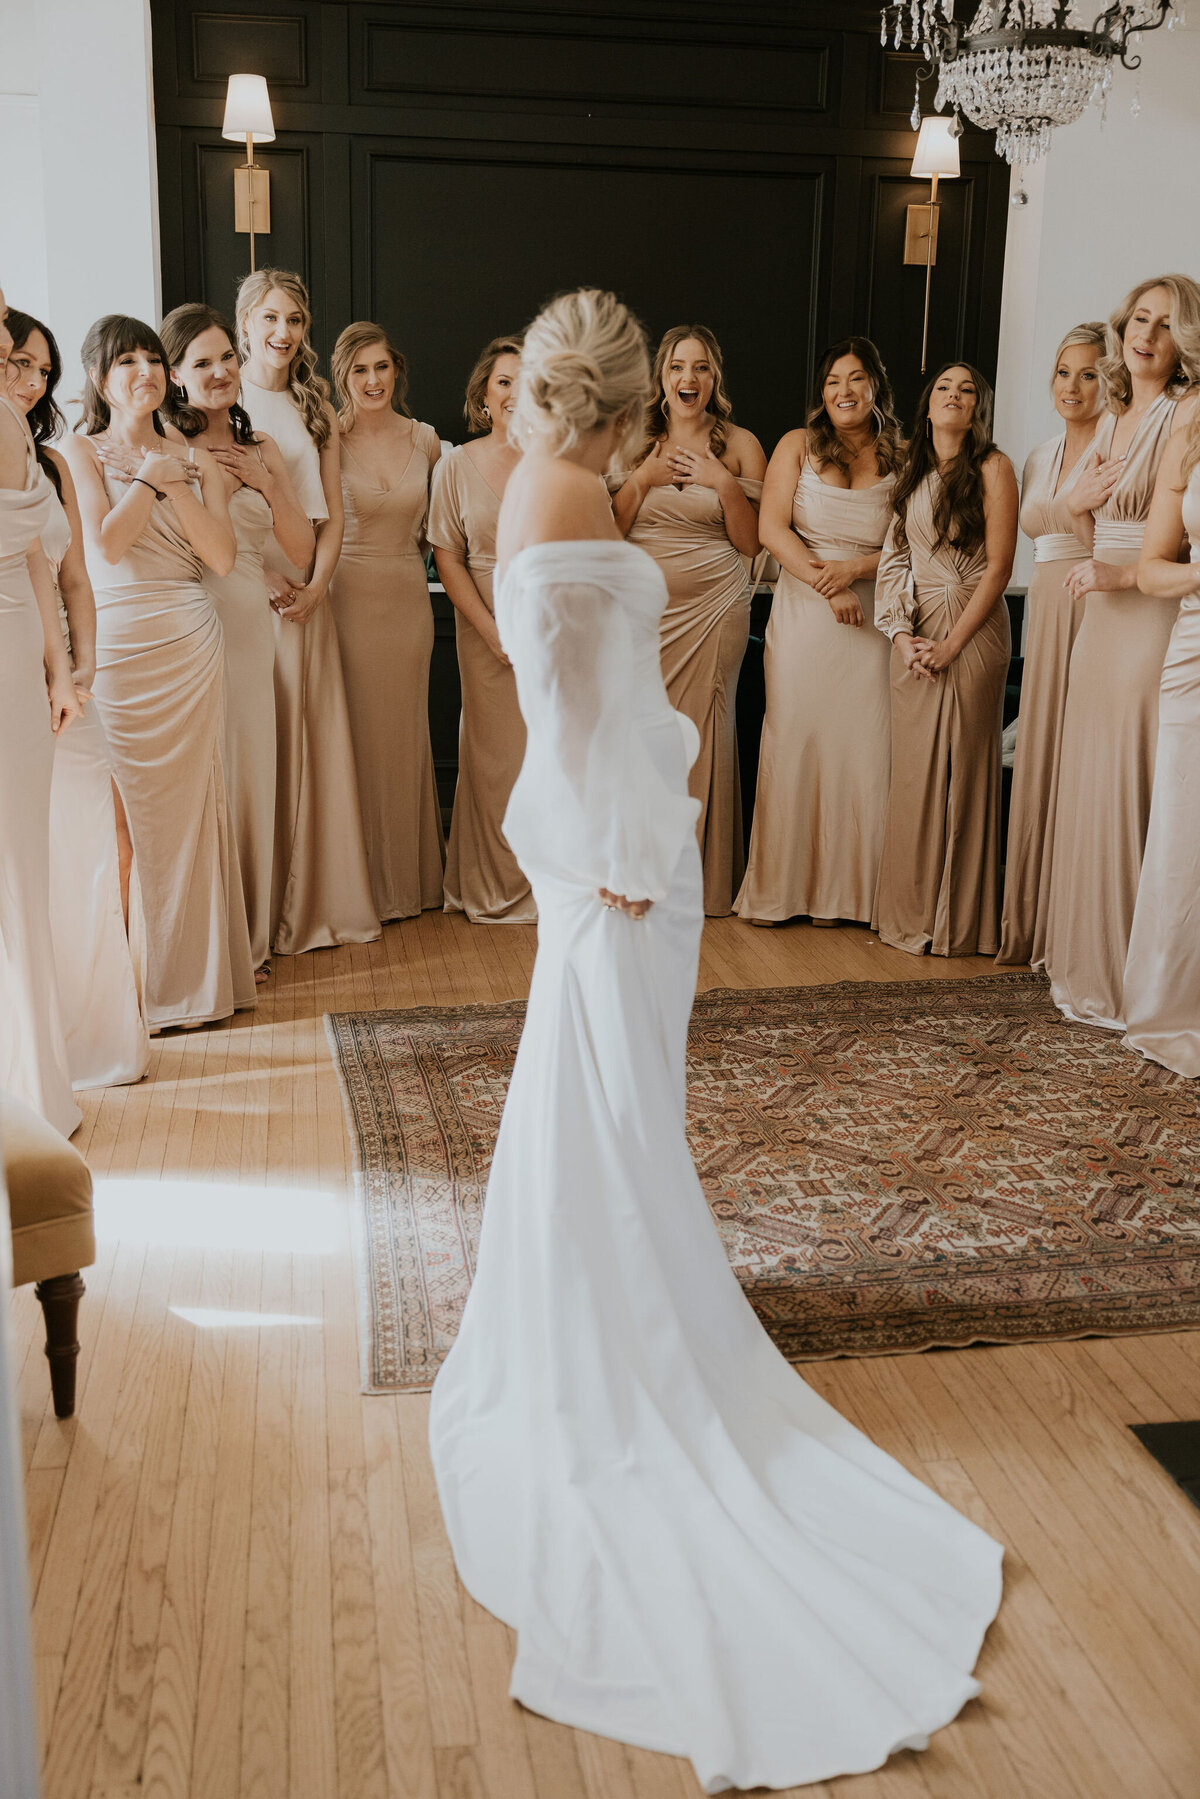 Classic white wedding dress with bridesmaids looking on